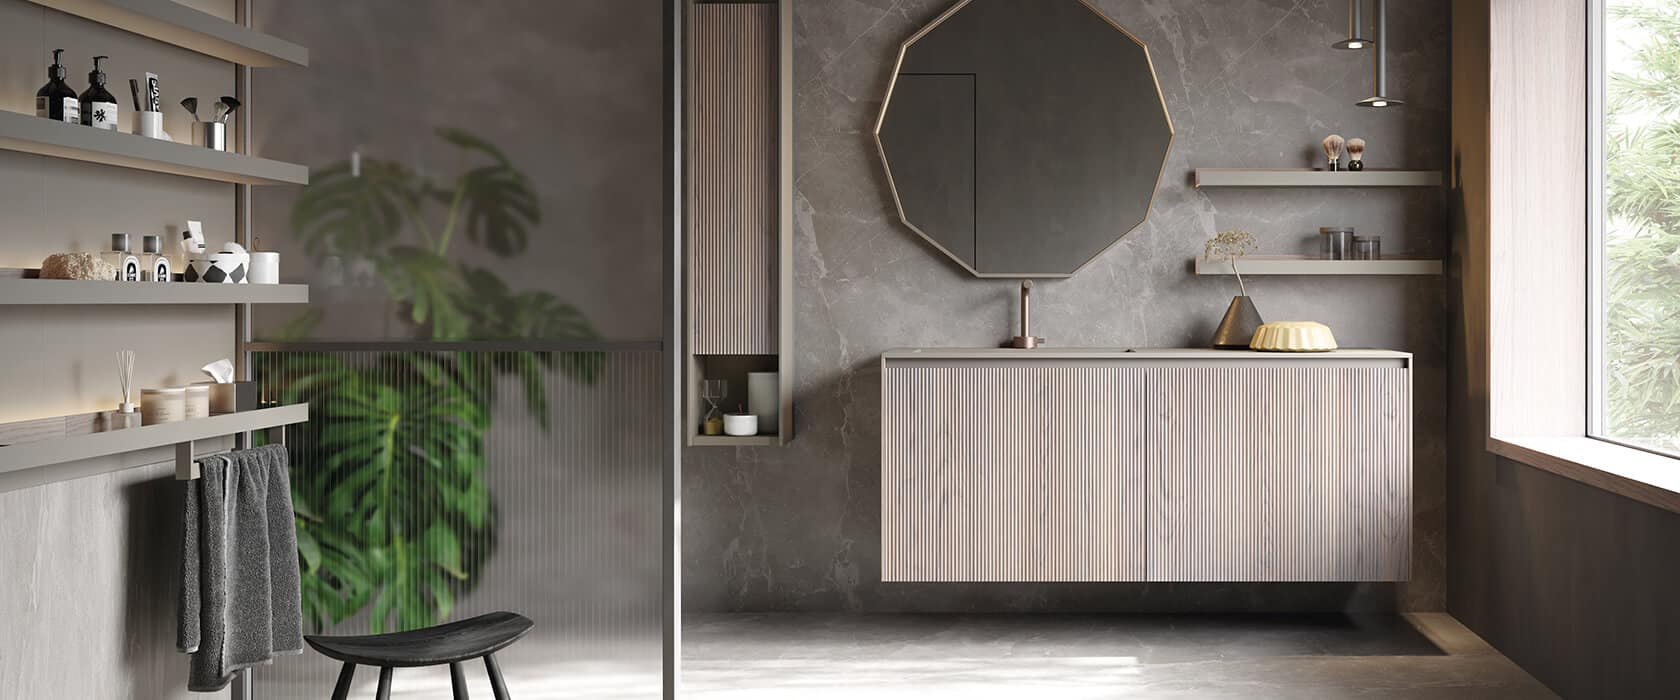 Vanity with plissé doors in Creta Oak mirrored by the door of the tall column, framed by a structure in Piombo matte lacquer. The ten-sided mirror adds visual variety and its frame in Piombo matte lacquer brings this sophisticated bath design full circle.  